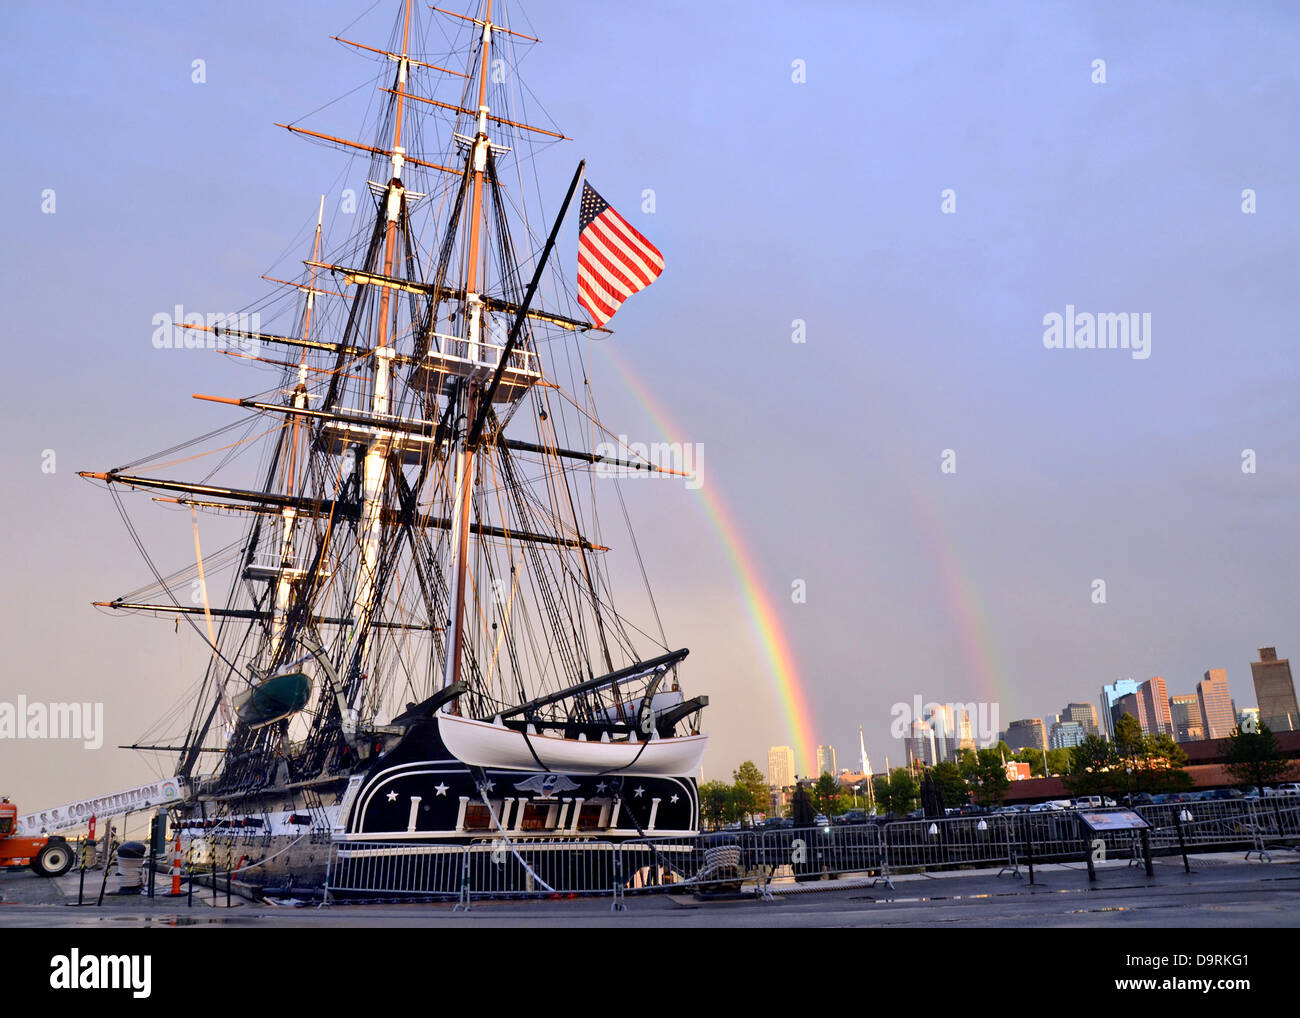 A double rainbow forms over the US Navy tall sailing ship the USS Constitution after an evening thunderstorm June 17, 2013 in Charleston, MA. Stock Photo